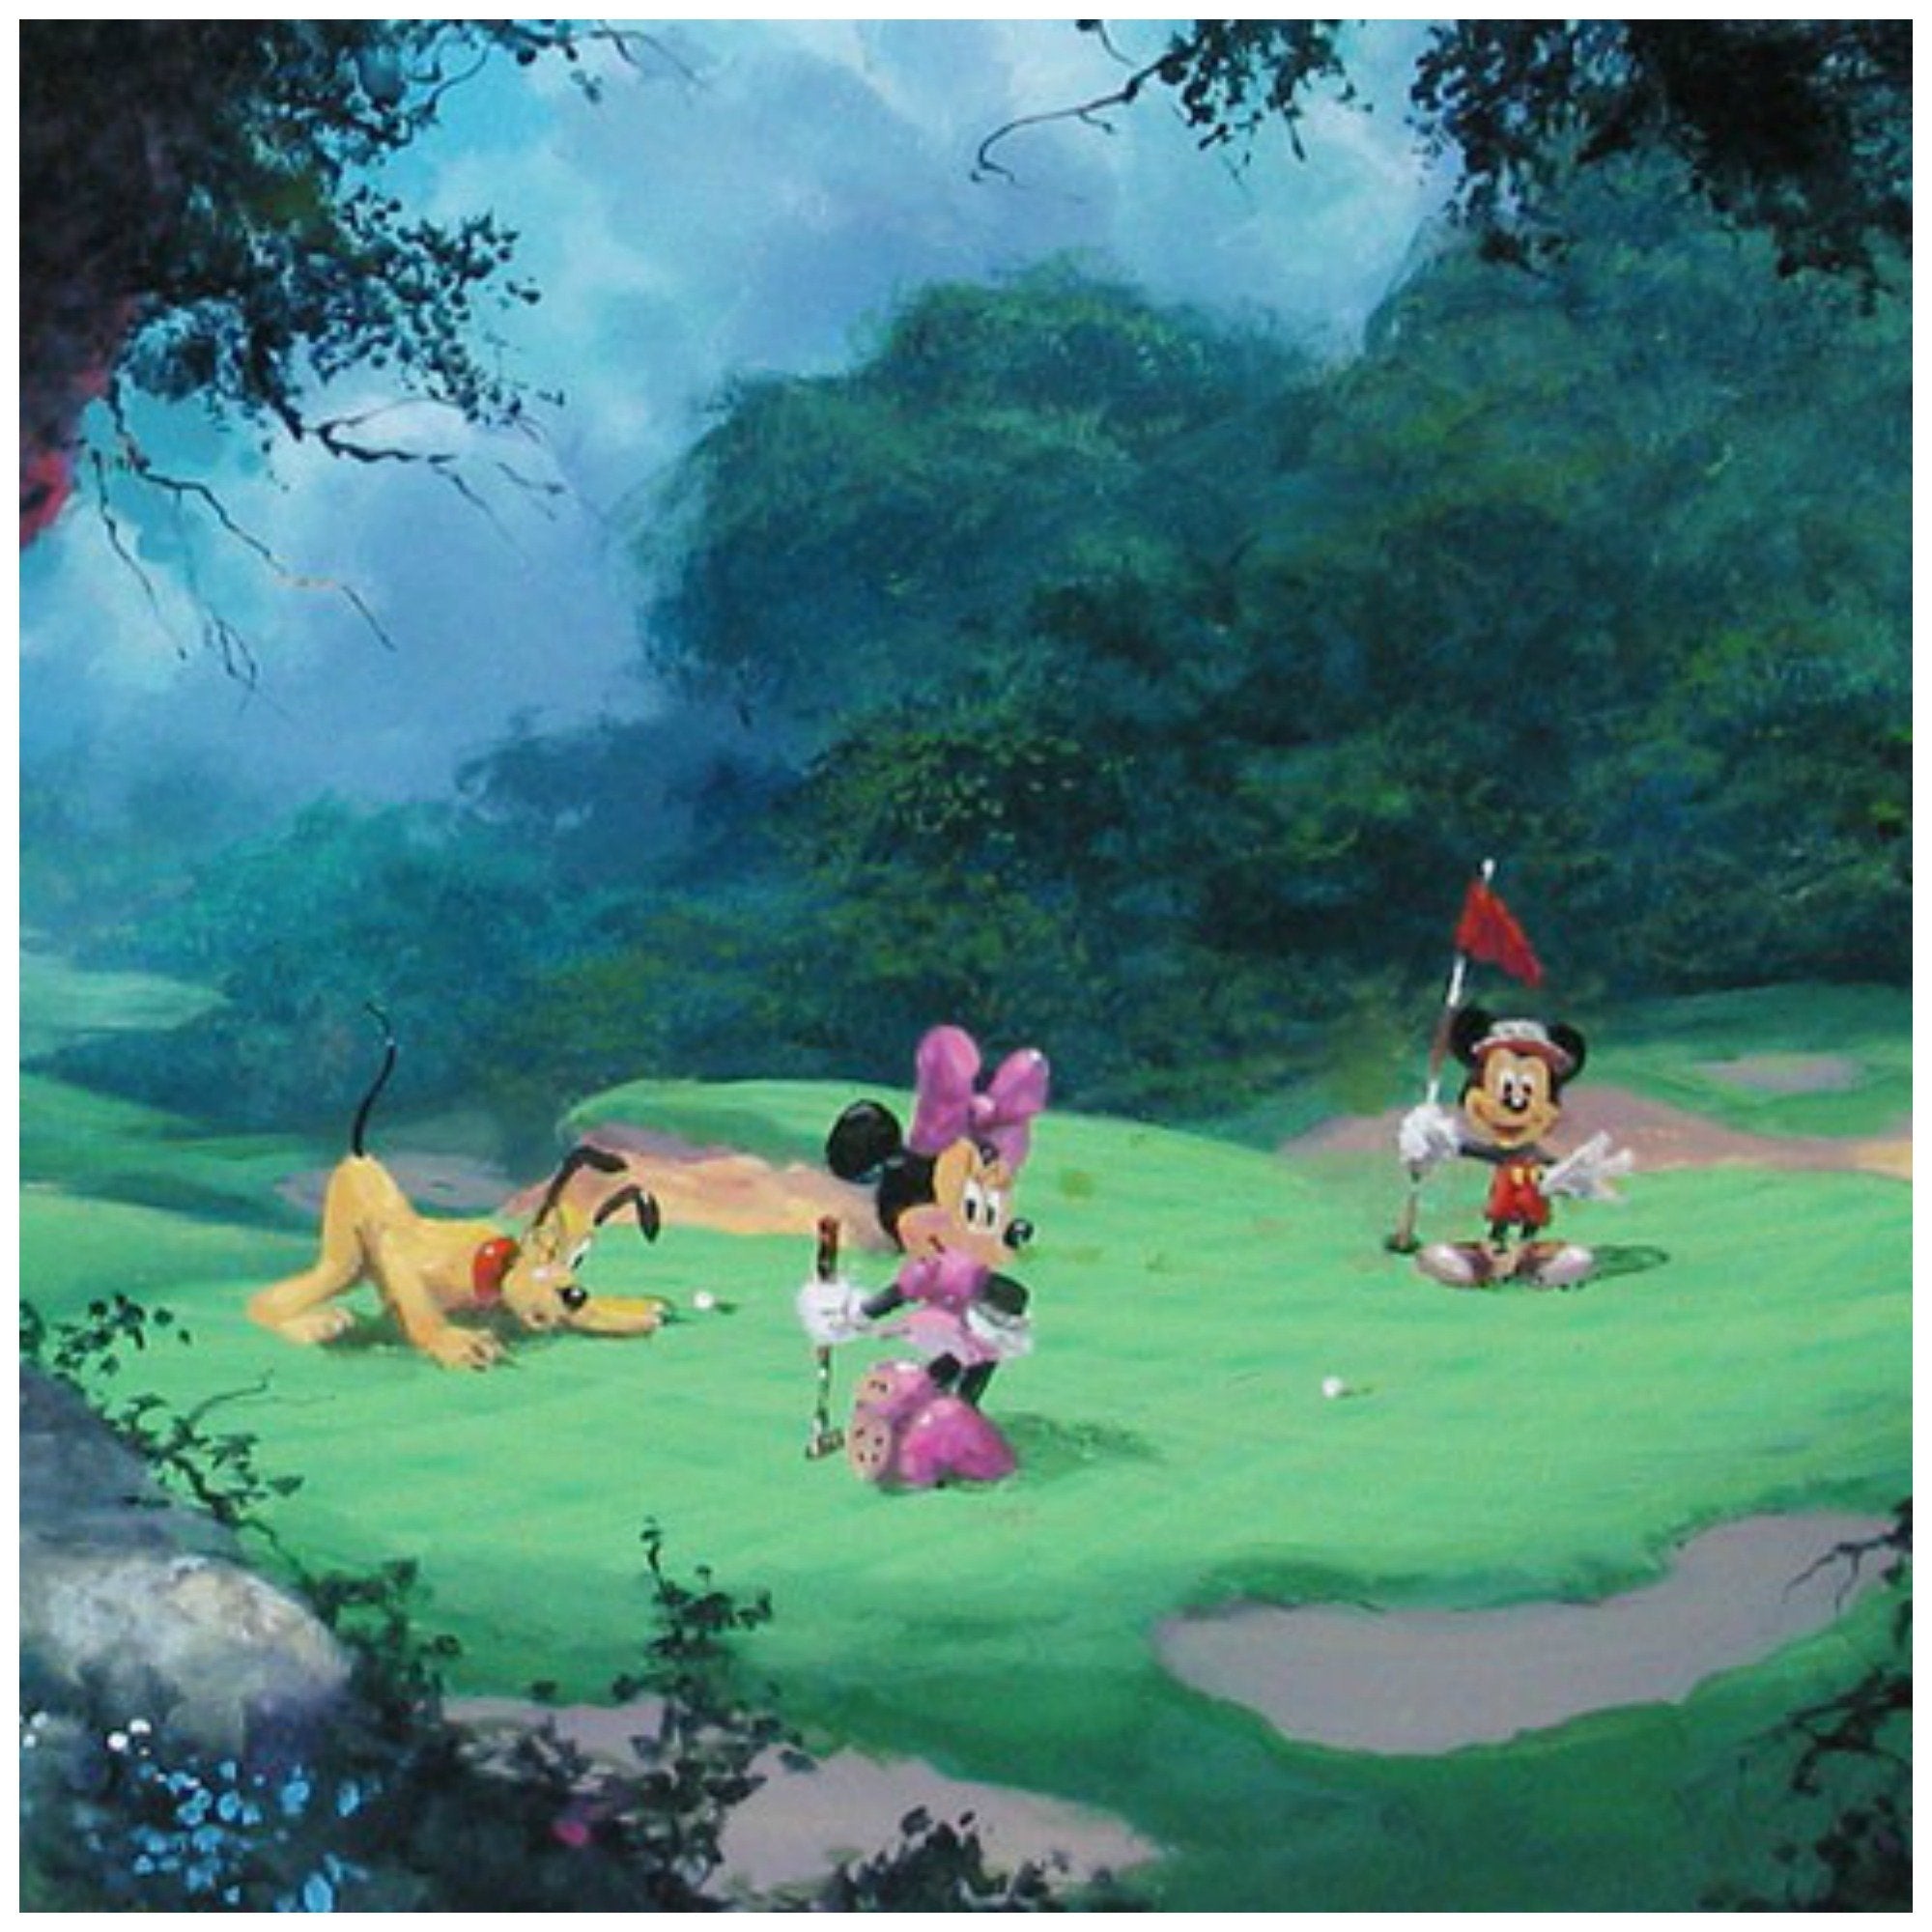 On the Green by James Coleman  A playful afternoon for Mickey, Pluto at the golf course along with Minnie as she takes her turn.